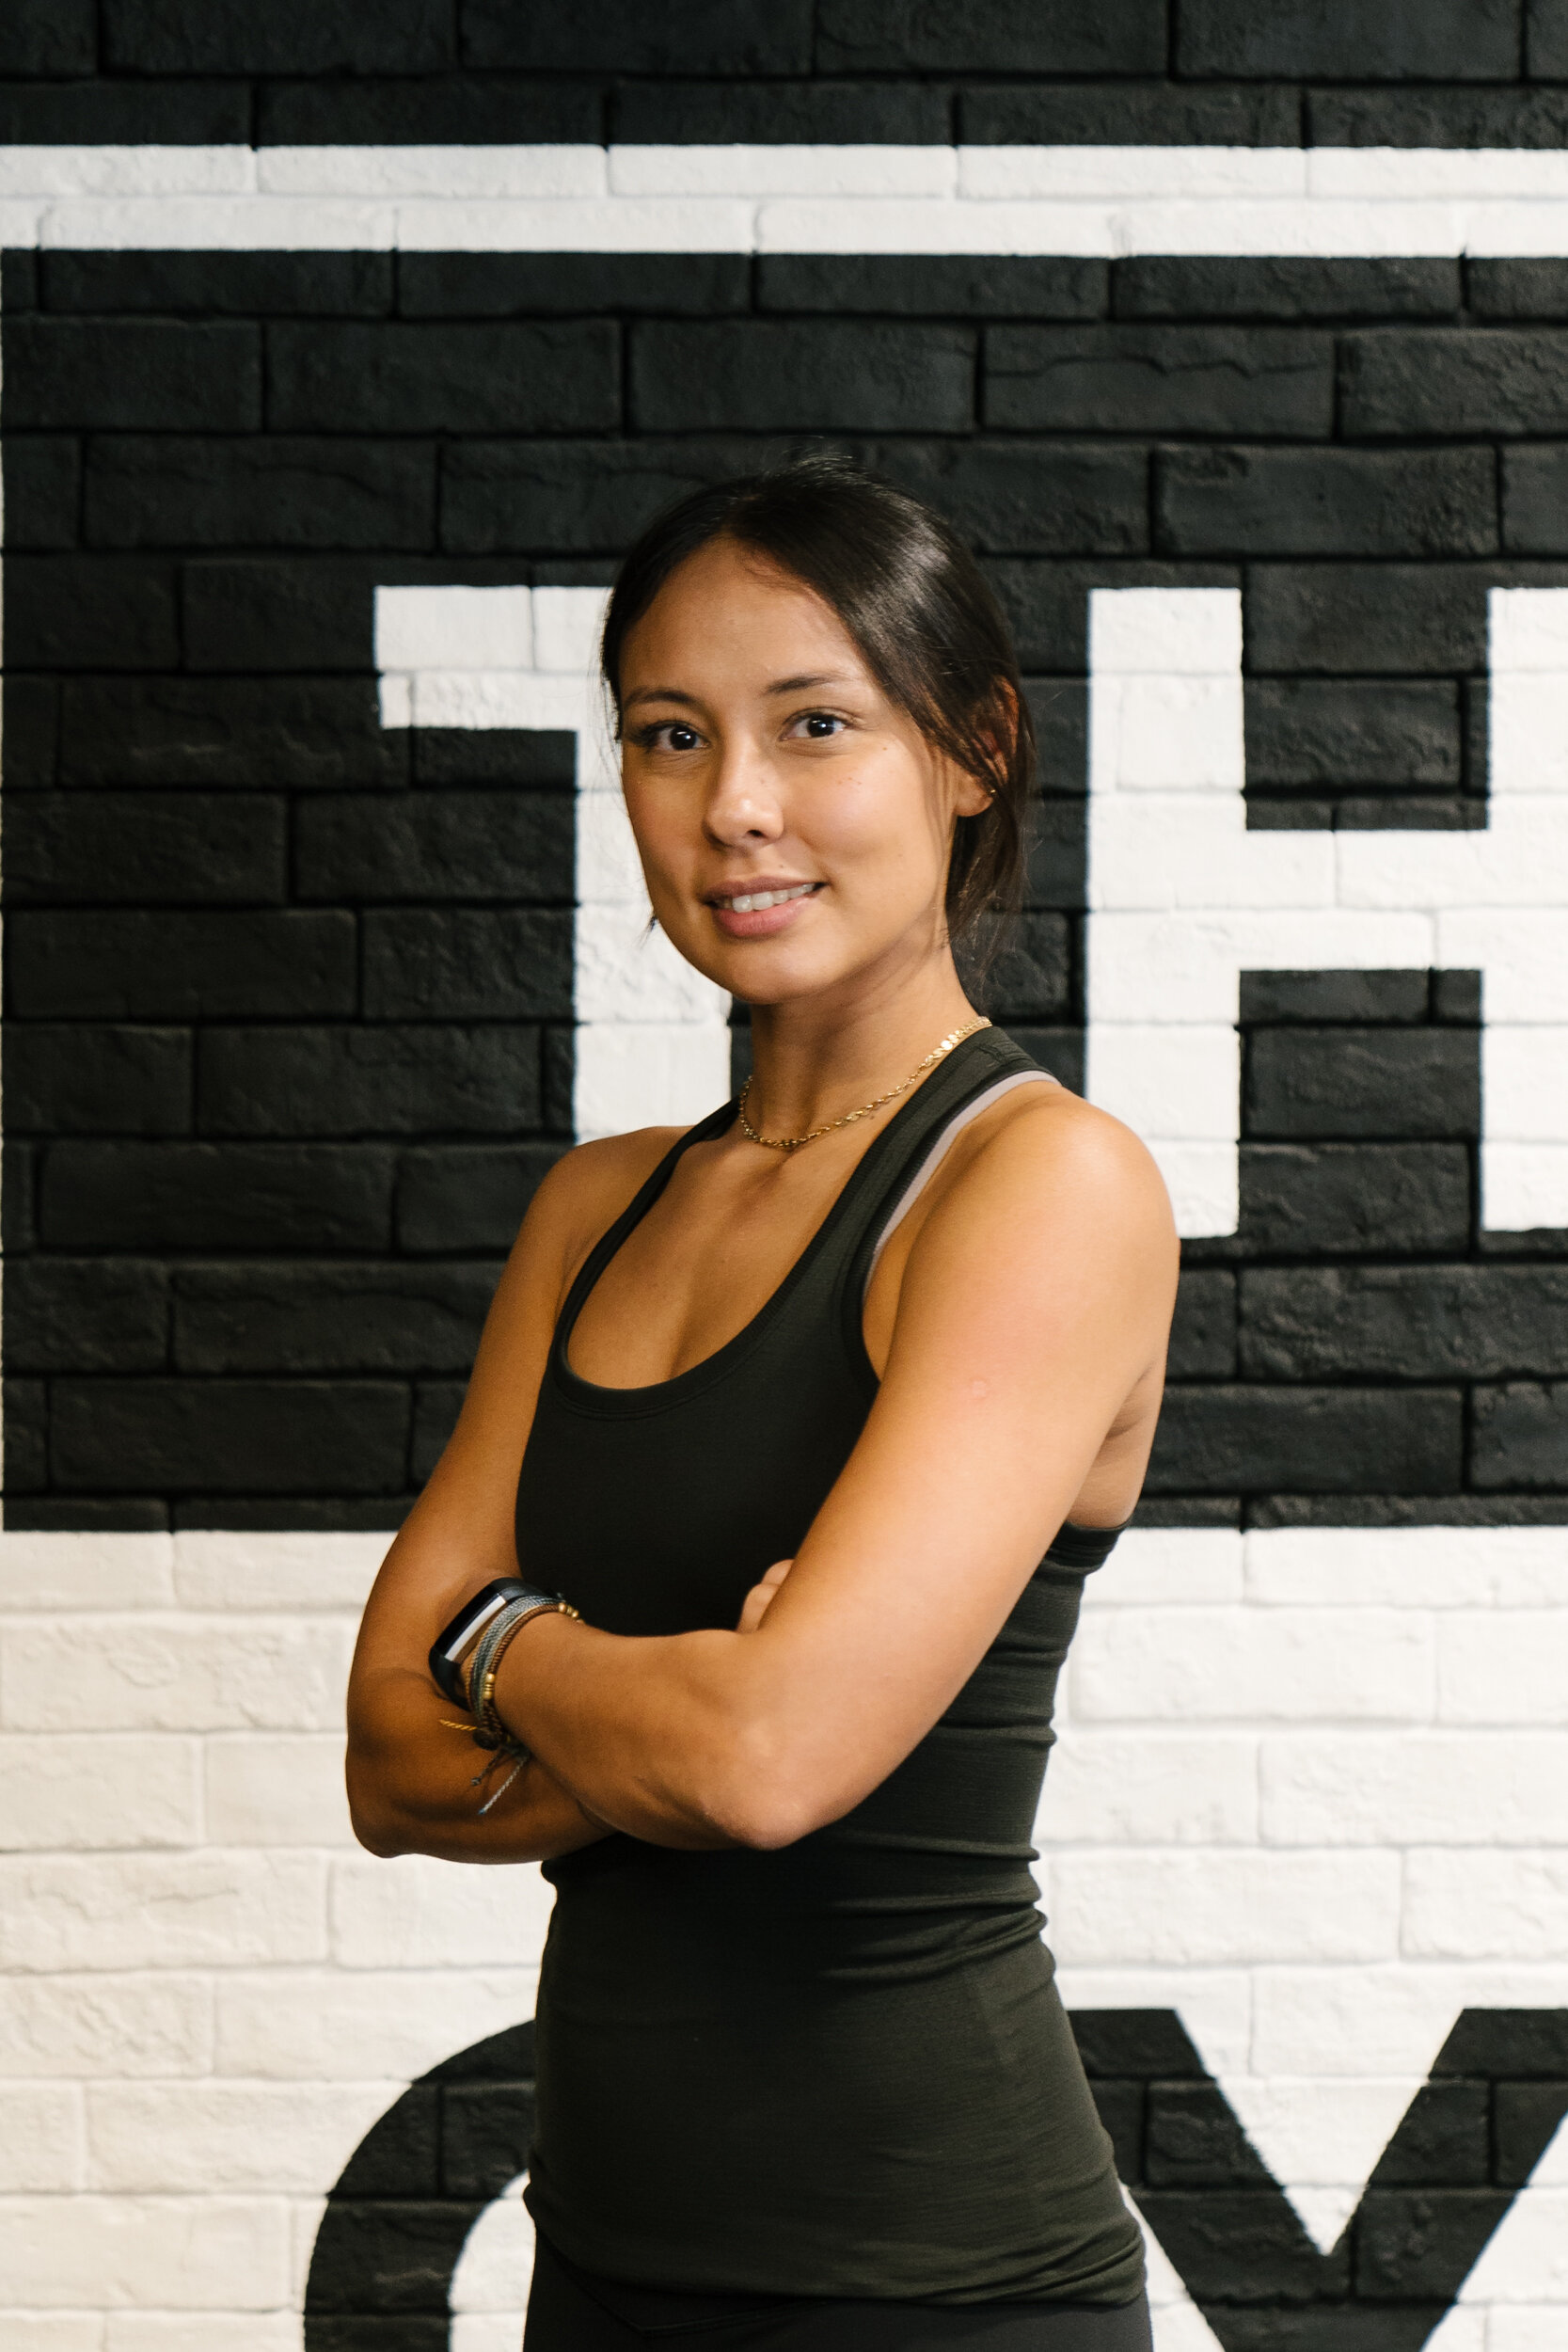 10 Best Female Personal Trainers In Hong Kong To Get You In Shape